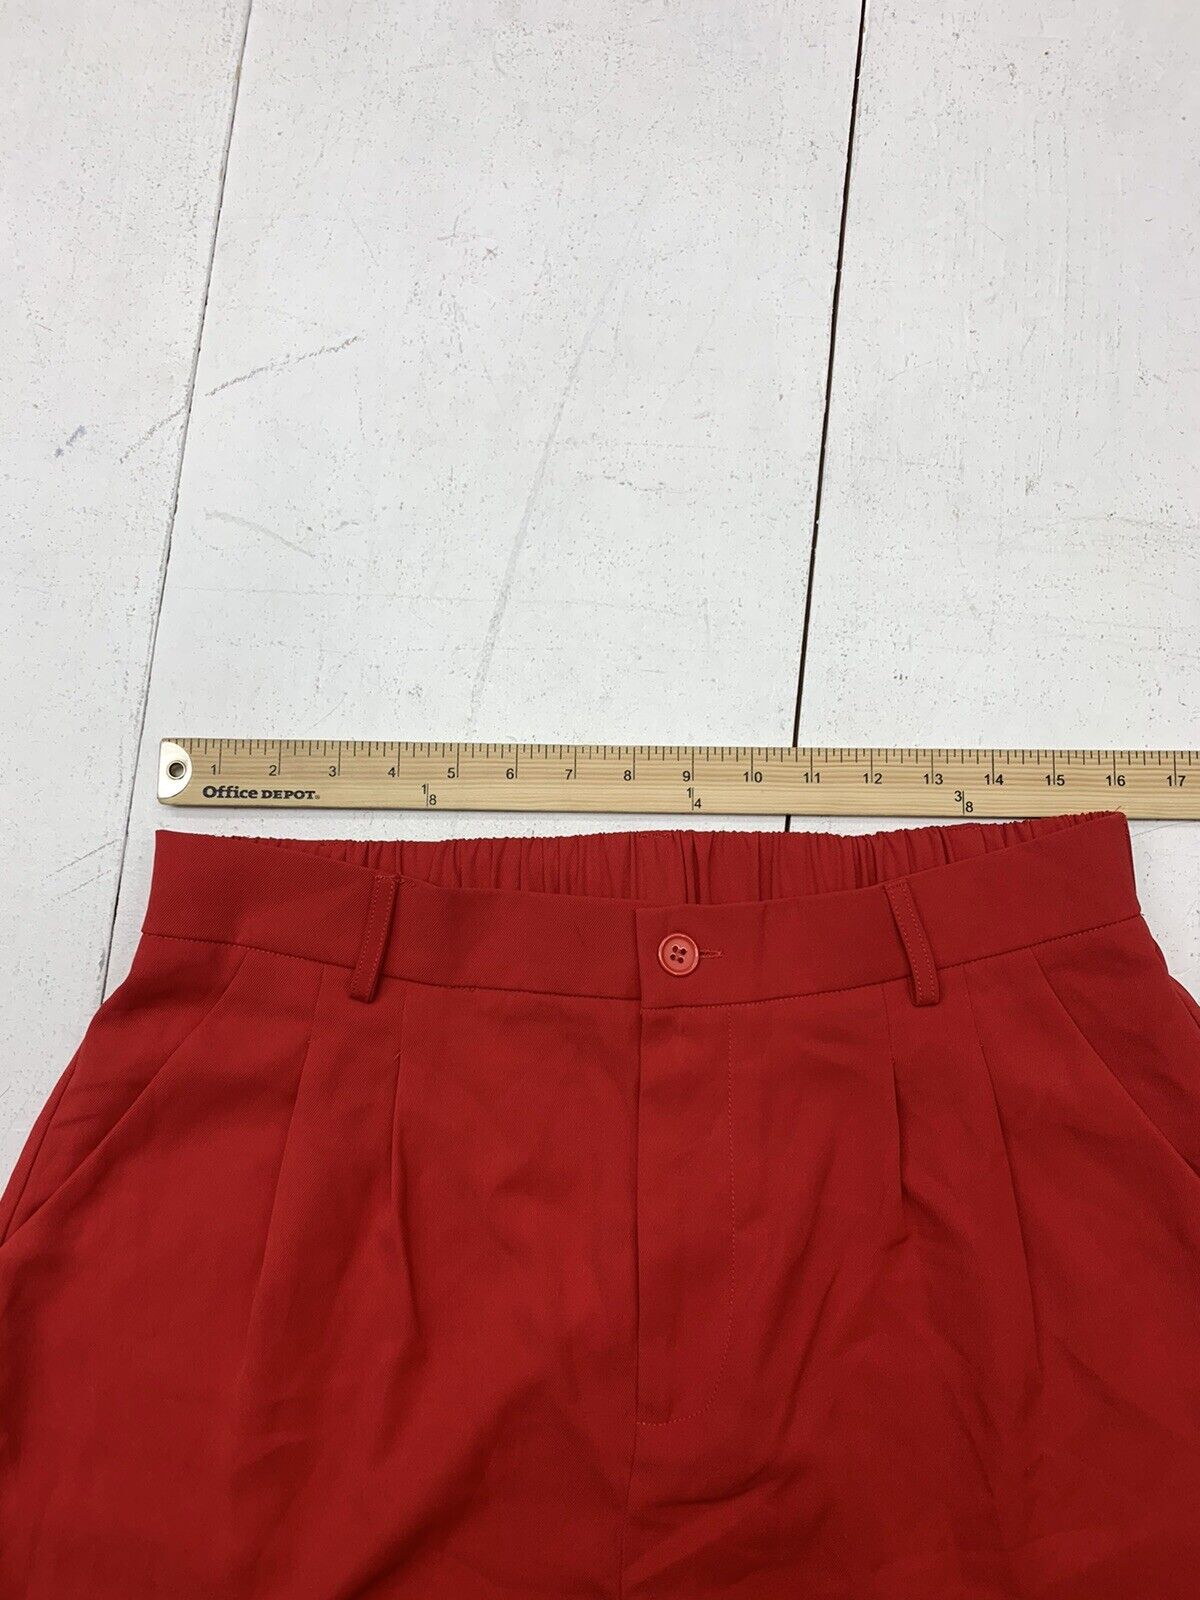 Unbranded Womens Red Elastic Waist Pants Size XL - beyond exchange